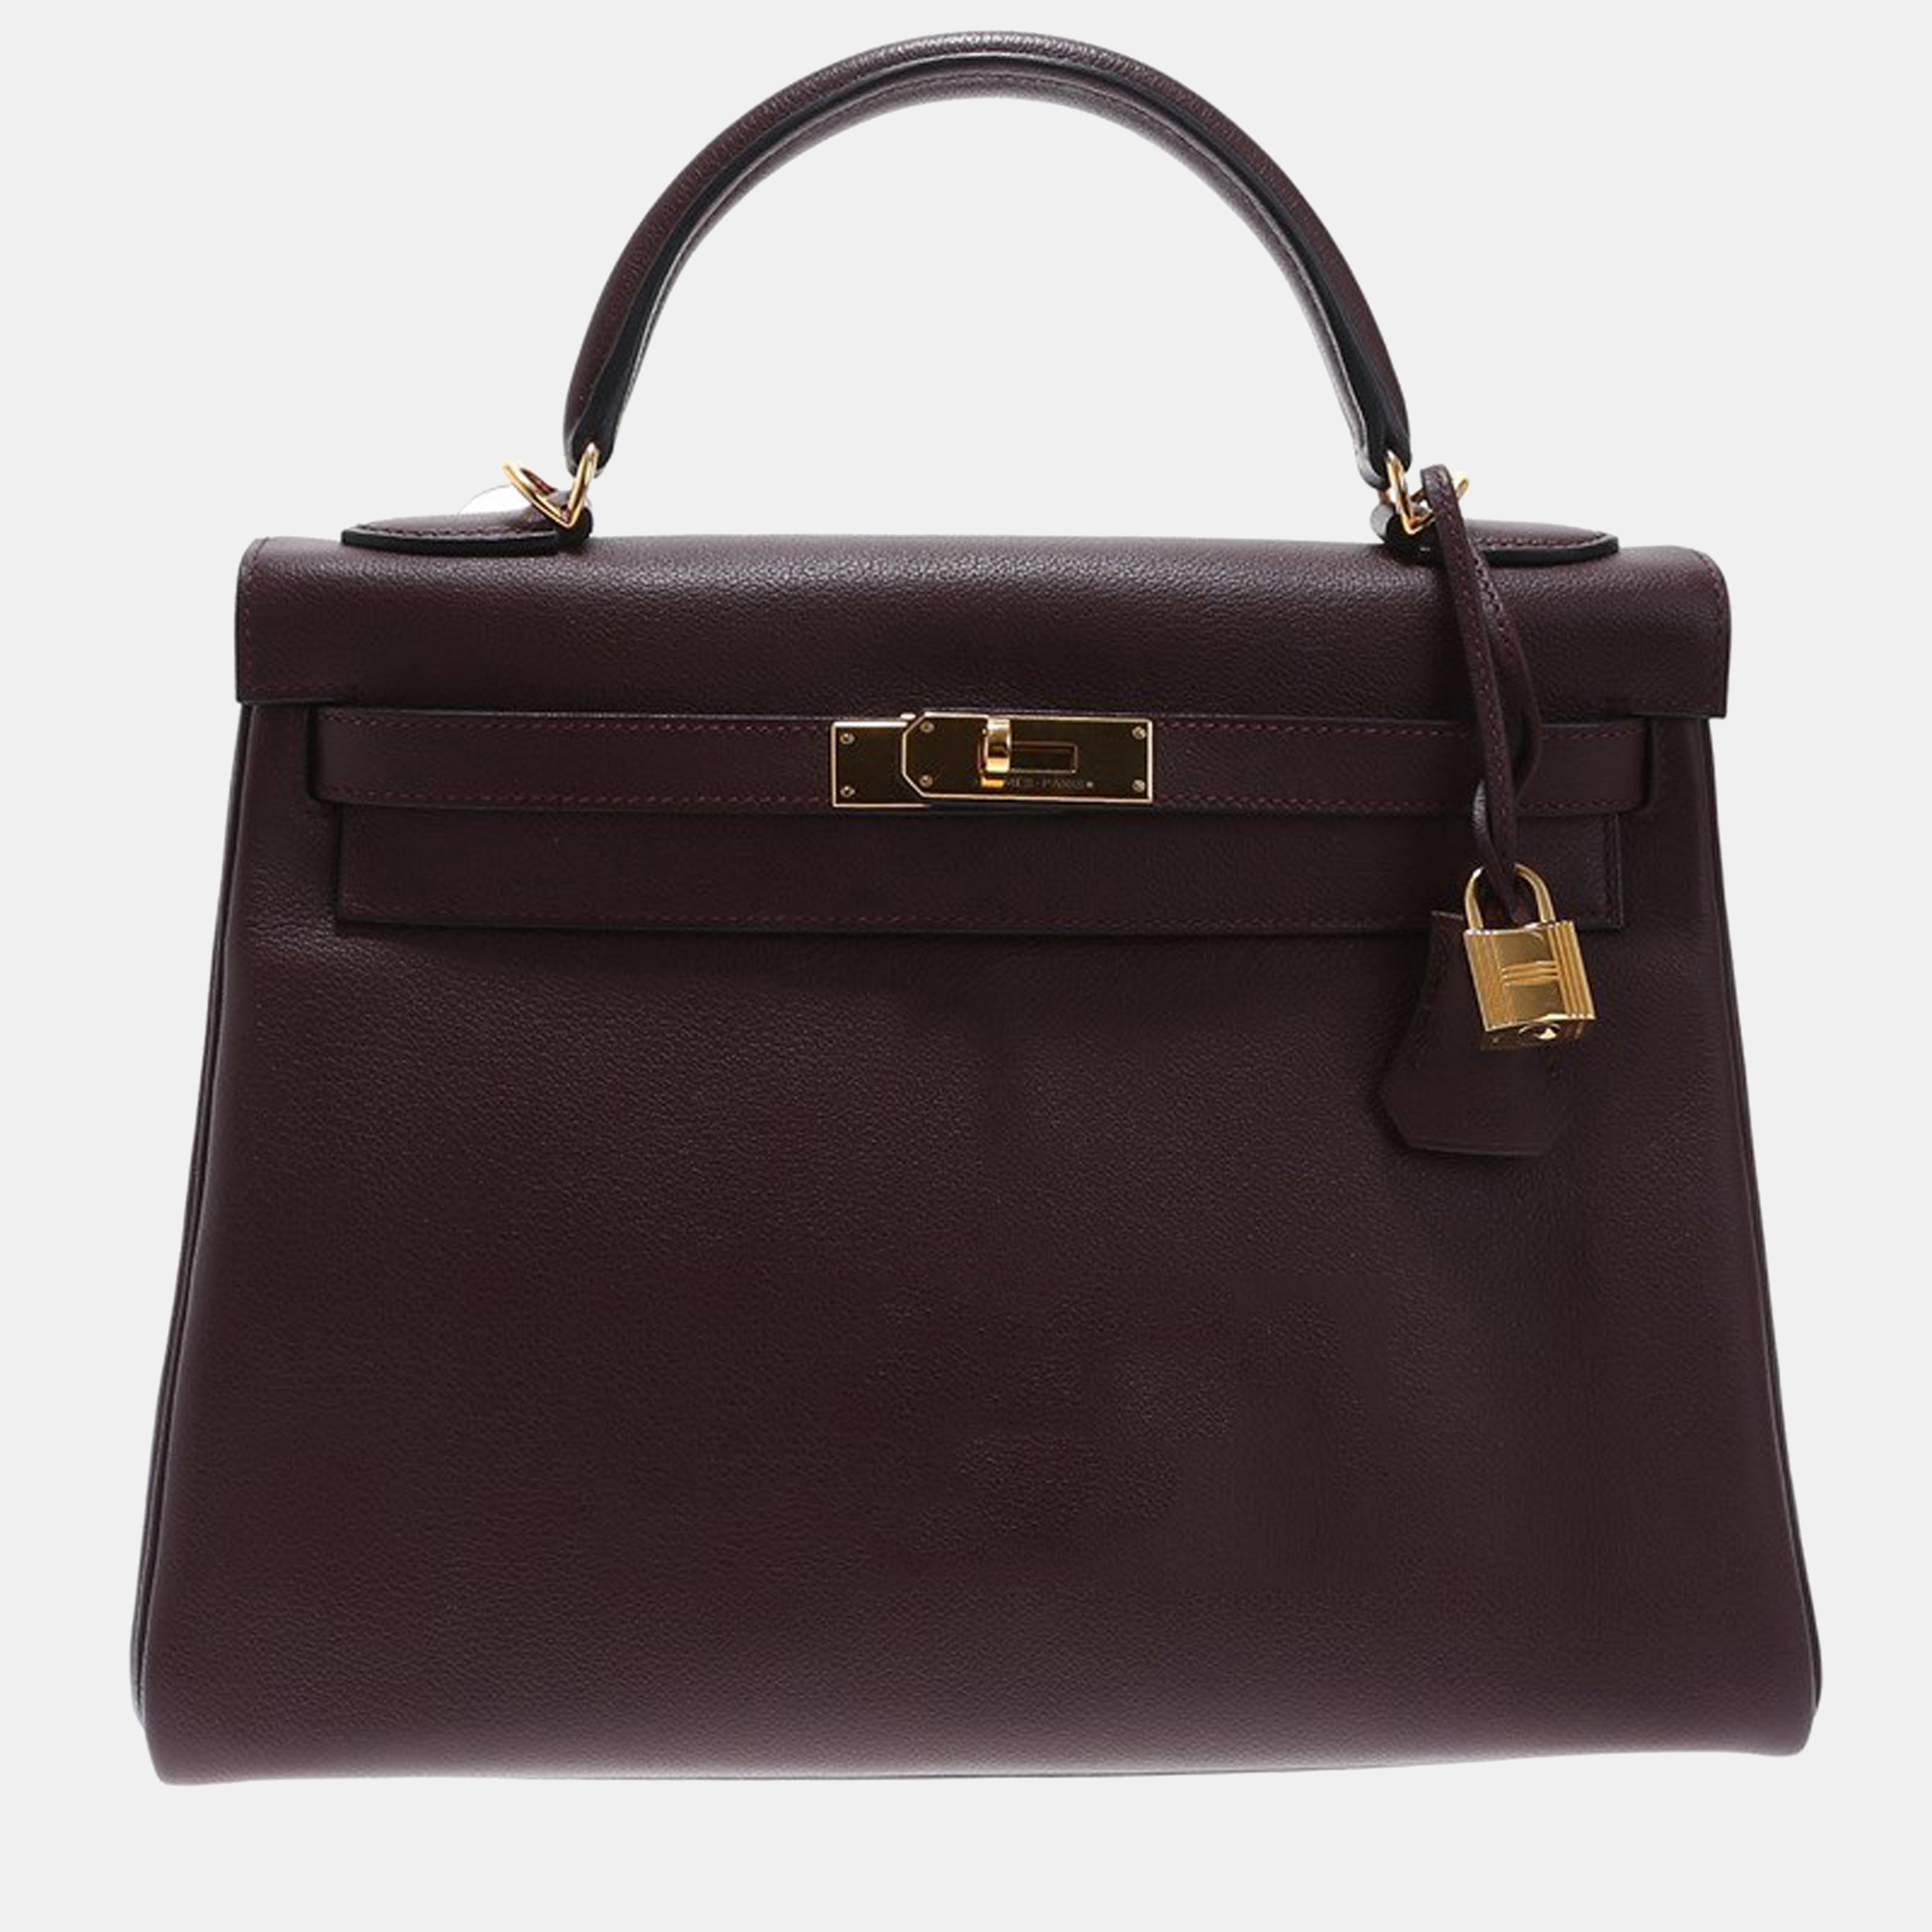 Hermes chocolate leather gold-plated hardware kelly 32 bag